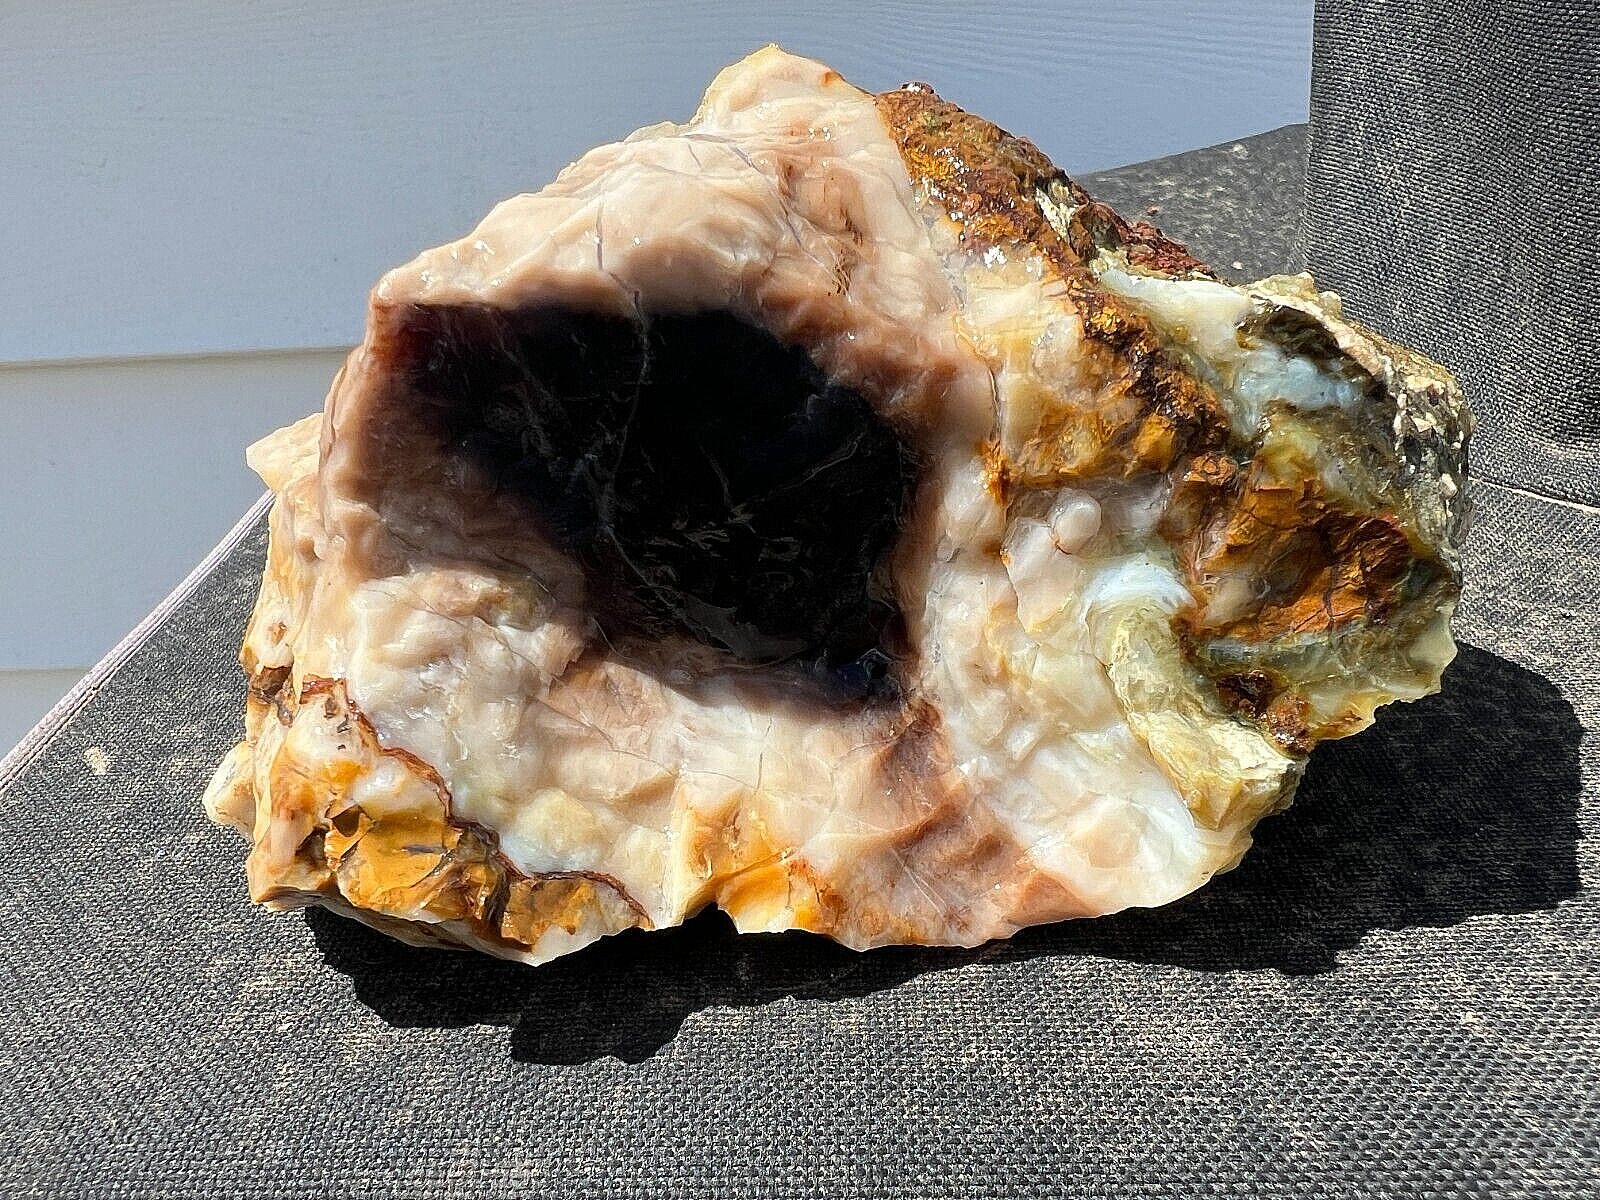 petrified wood rough agatized opalized special chalcedony agate 1lb 14oz display